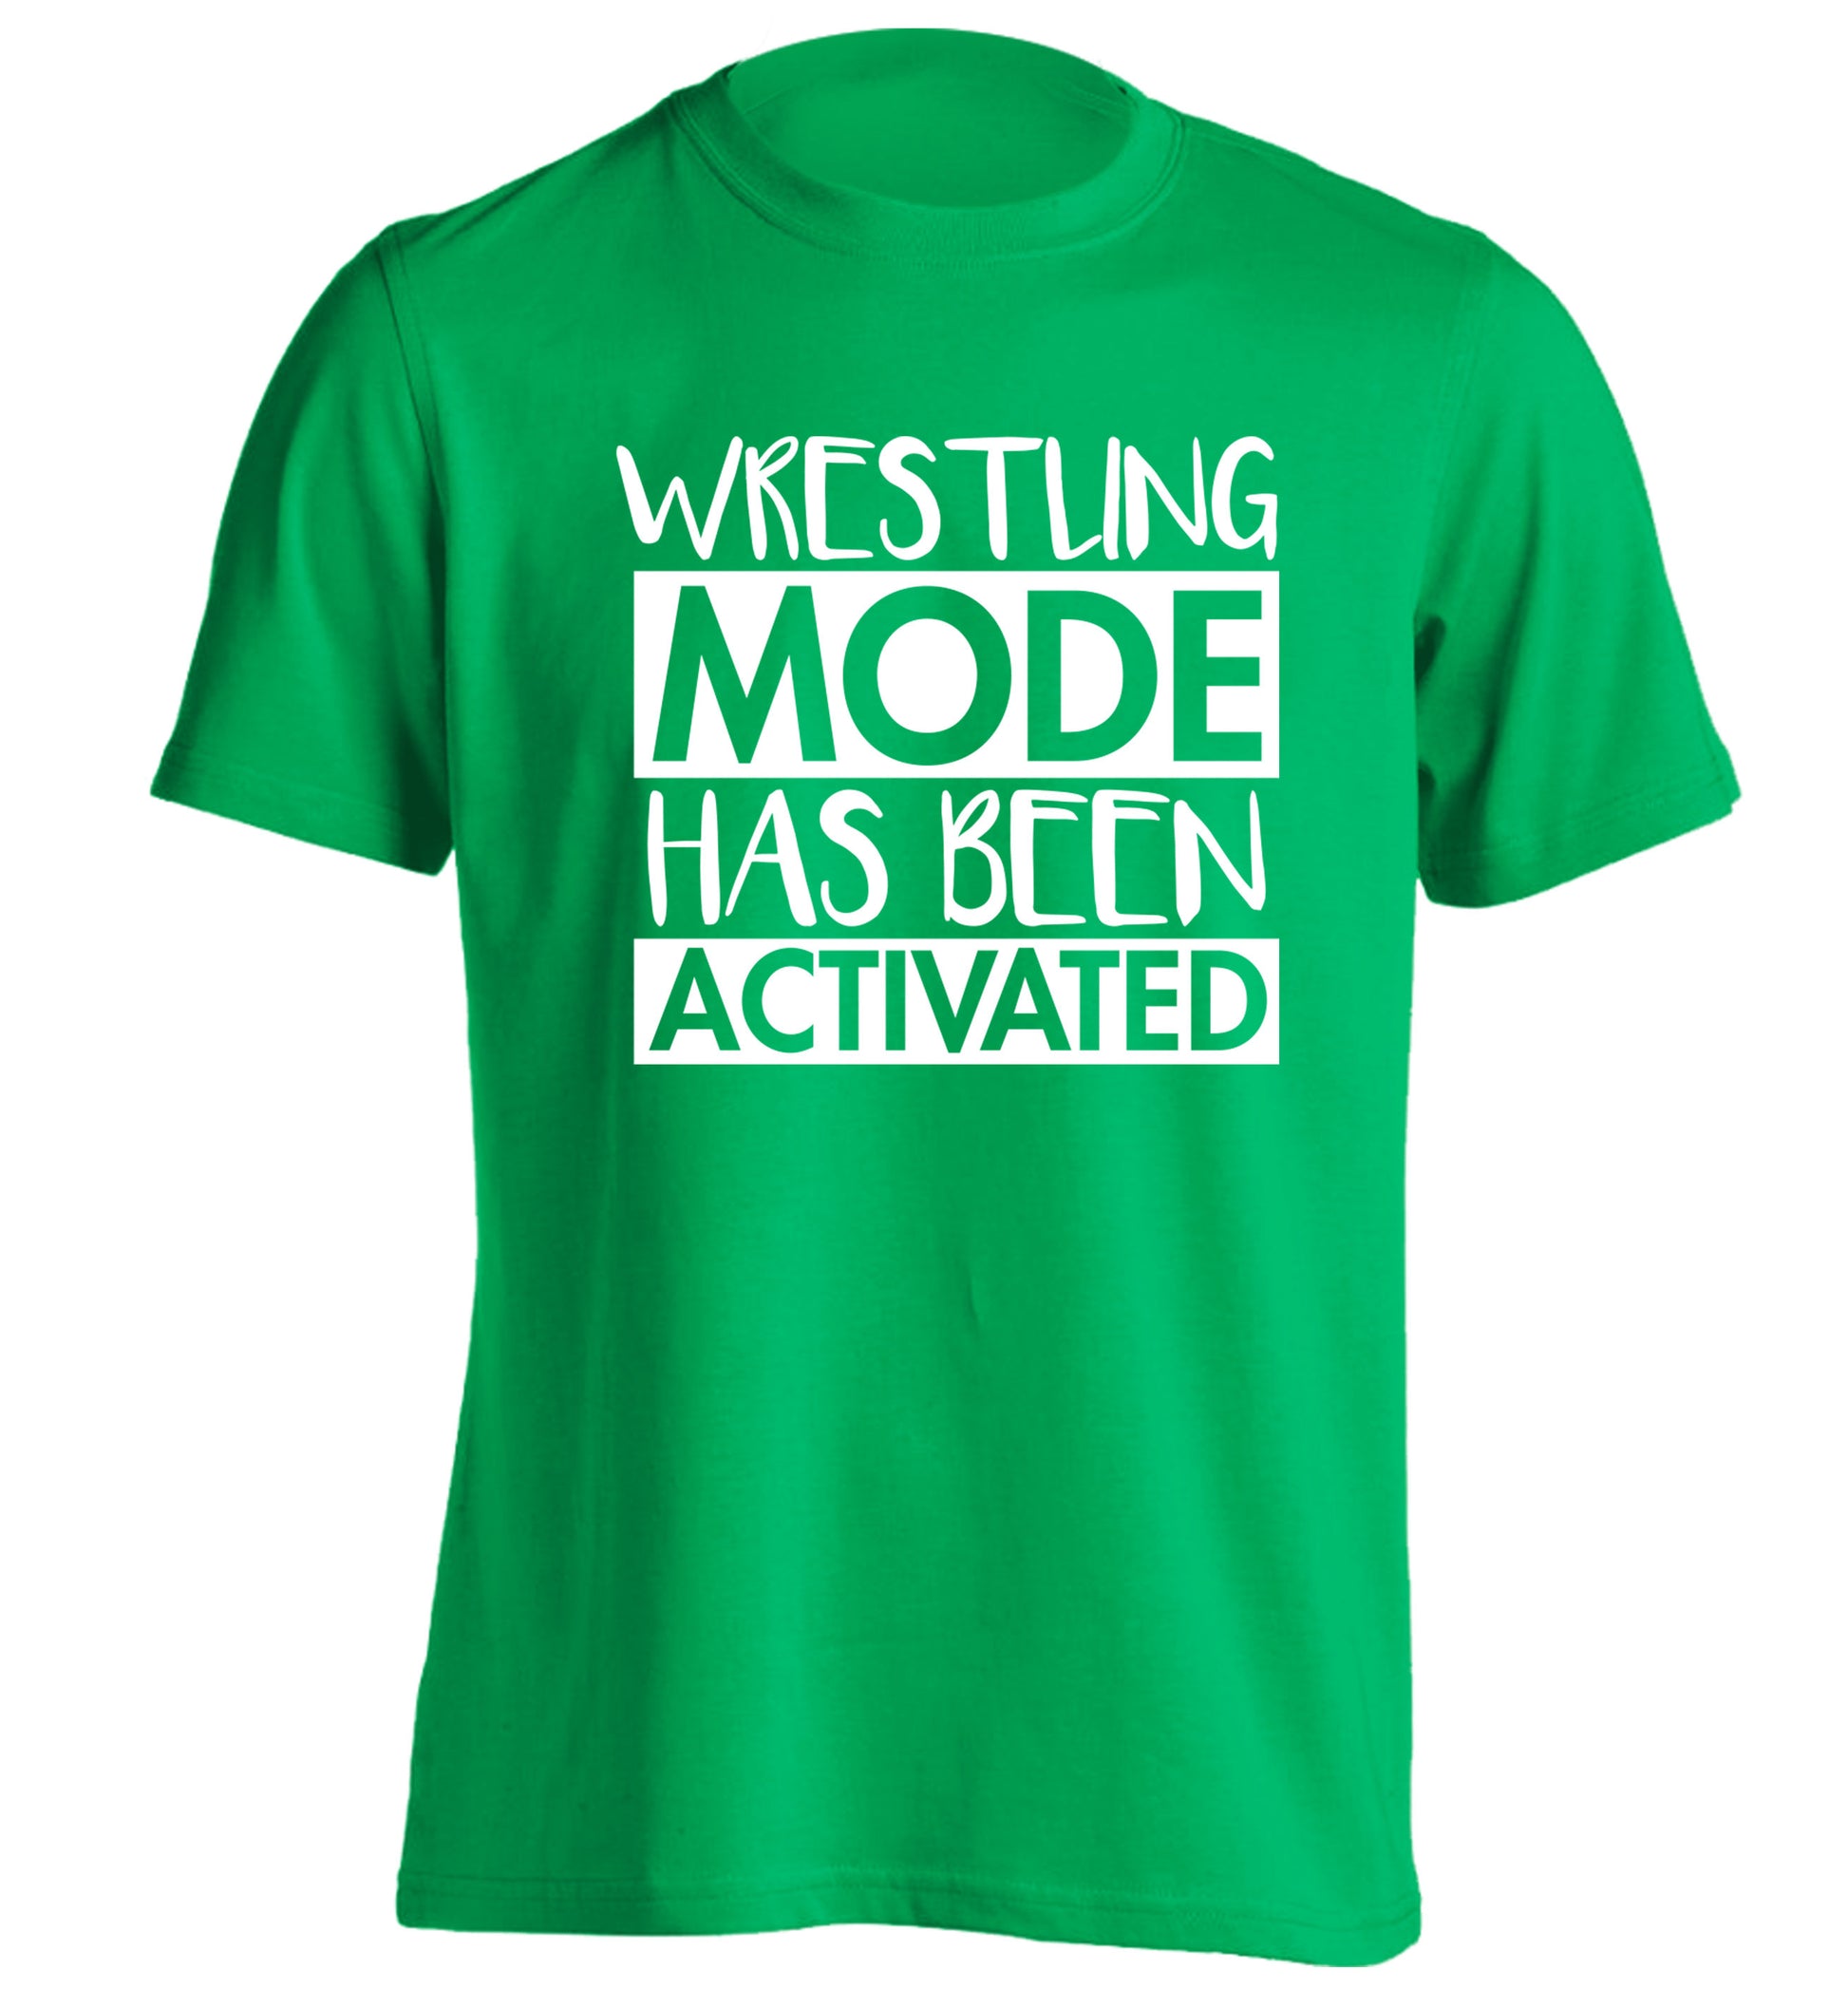 Wresting mode activated adults unisex green Tshirt 2XL